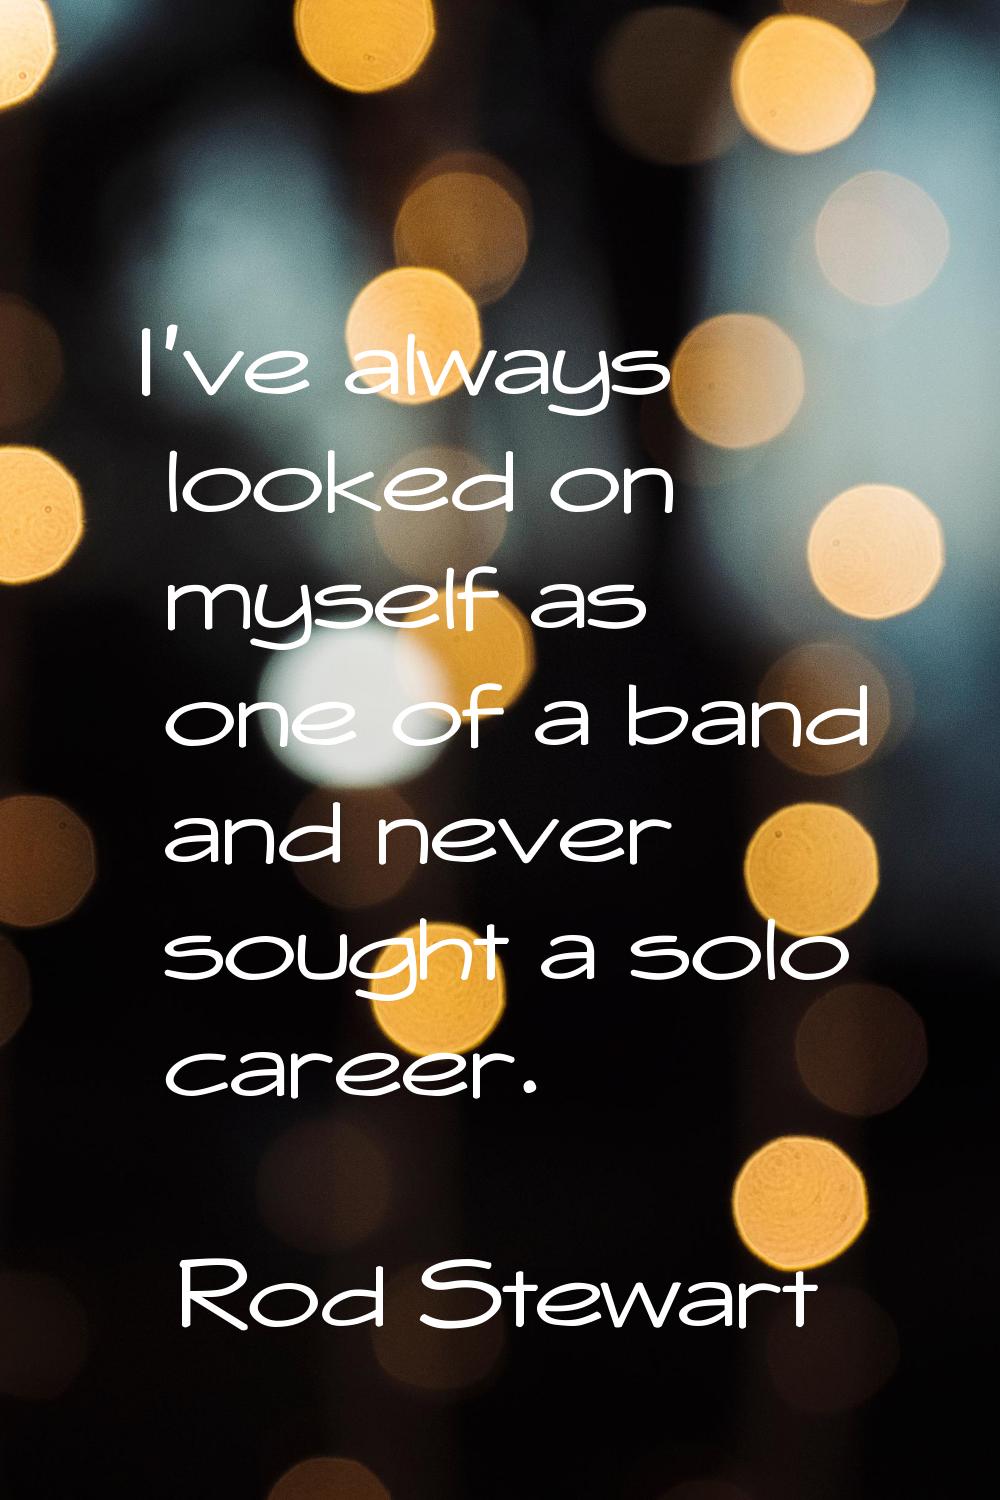 I've always looked on myself as one of a band and never sought a solo career.